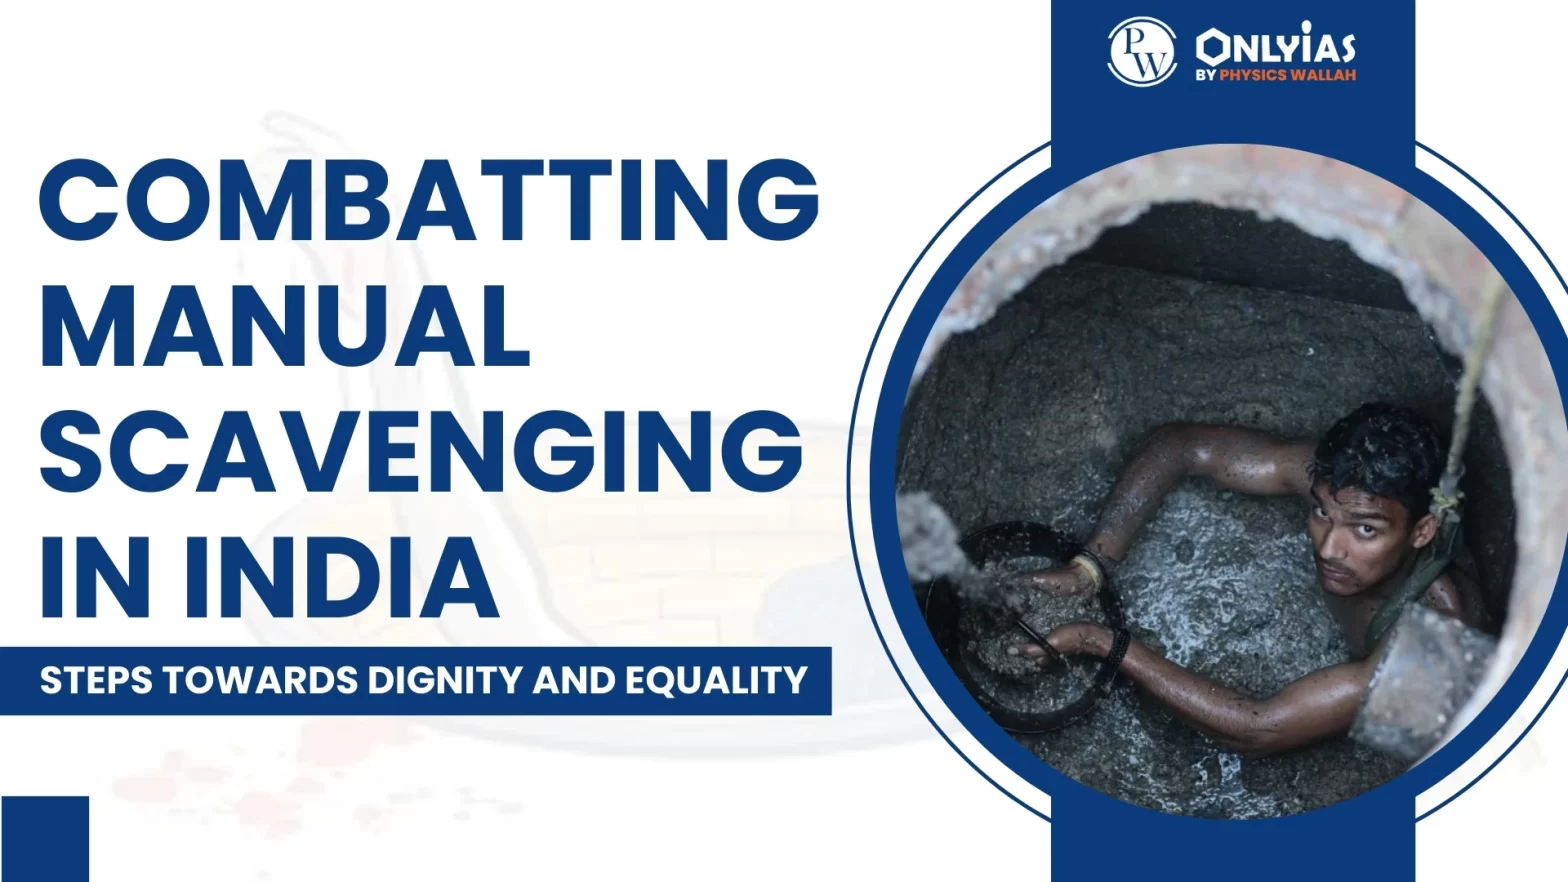 Combatting Manual Scavenging In India: Steps Towards Dignity and Equality